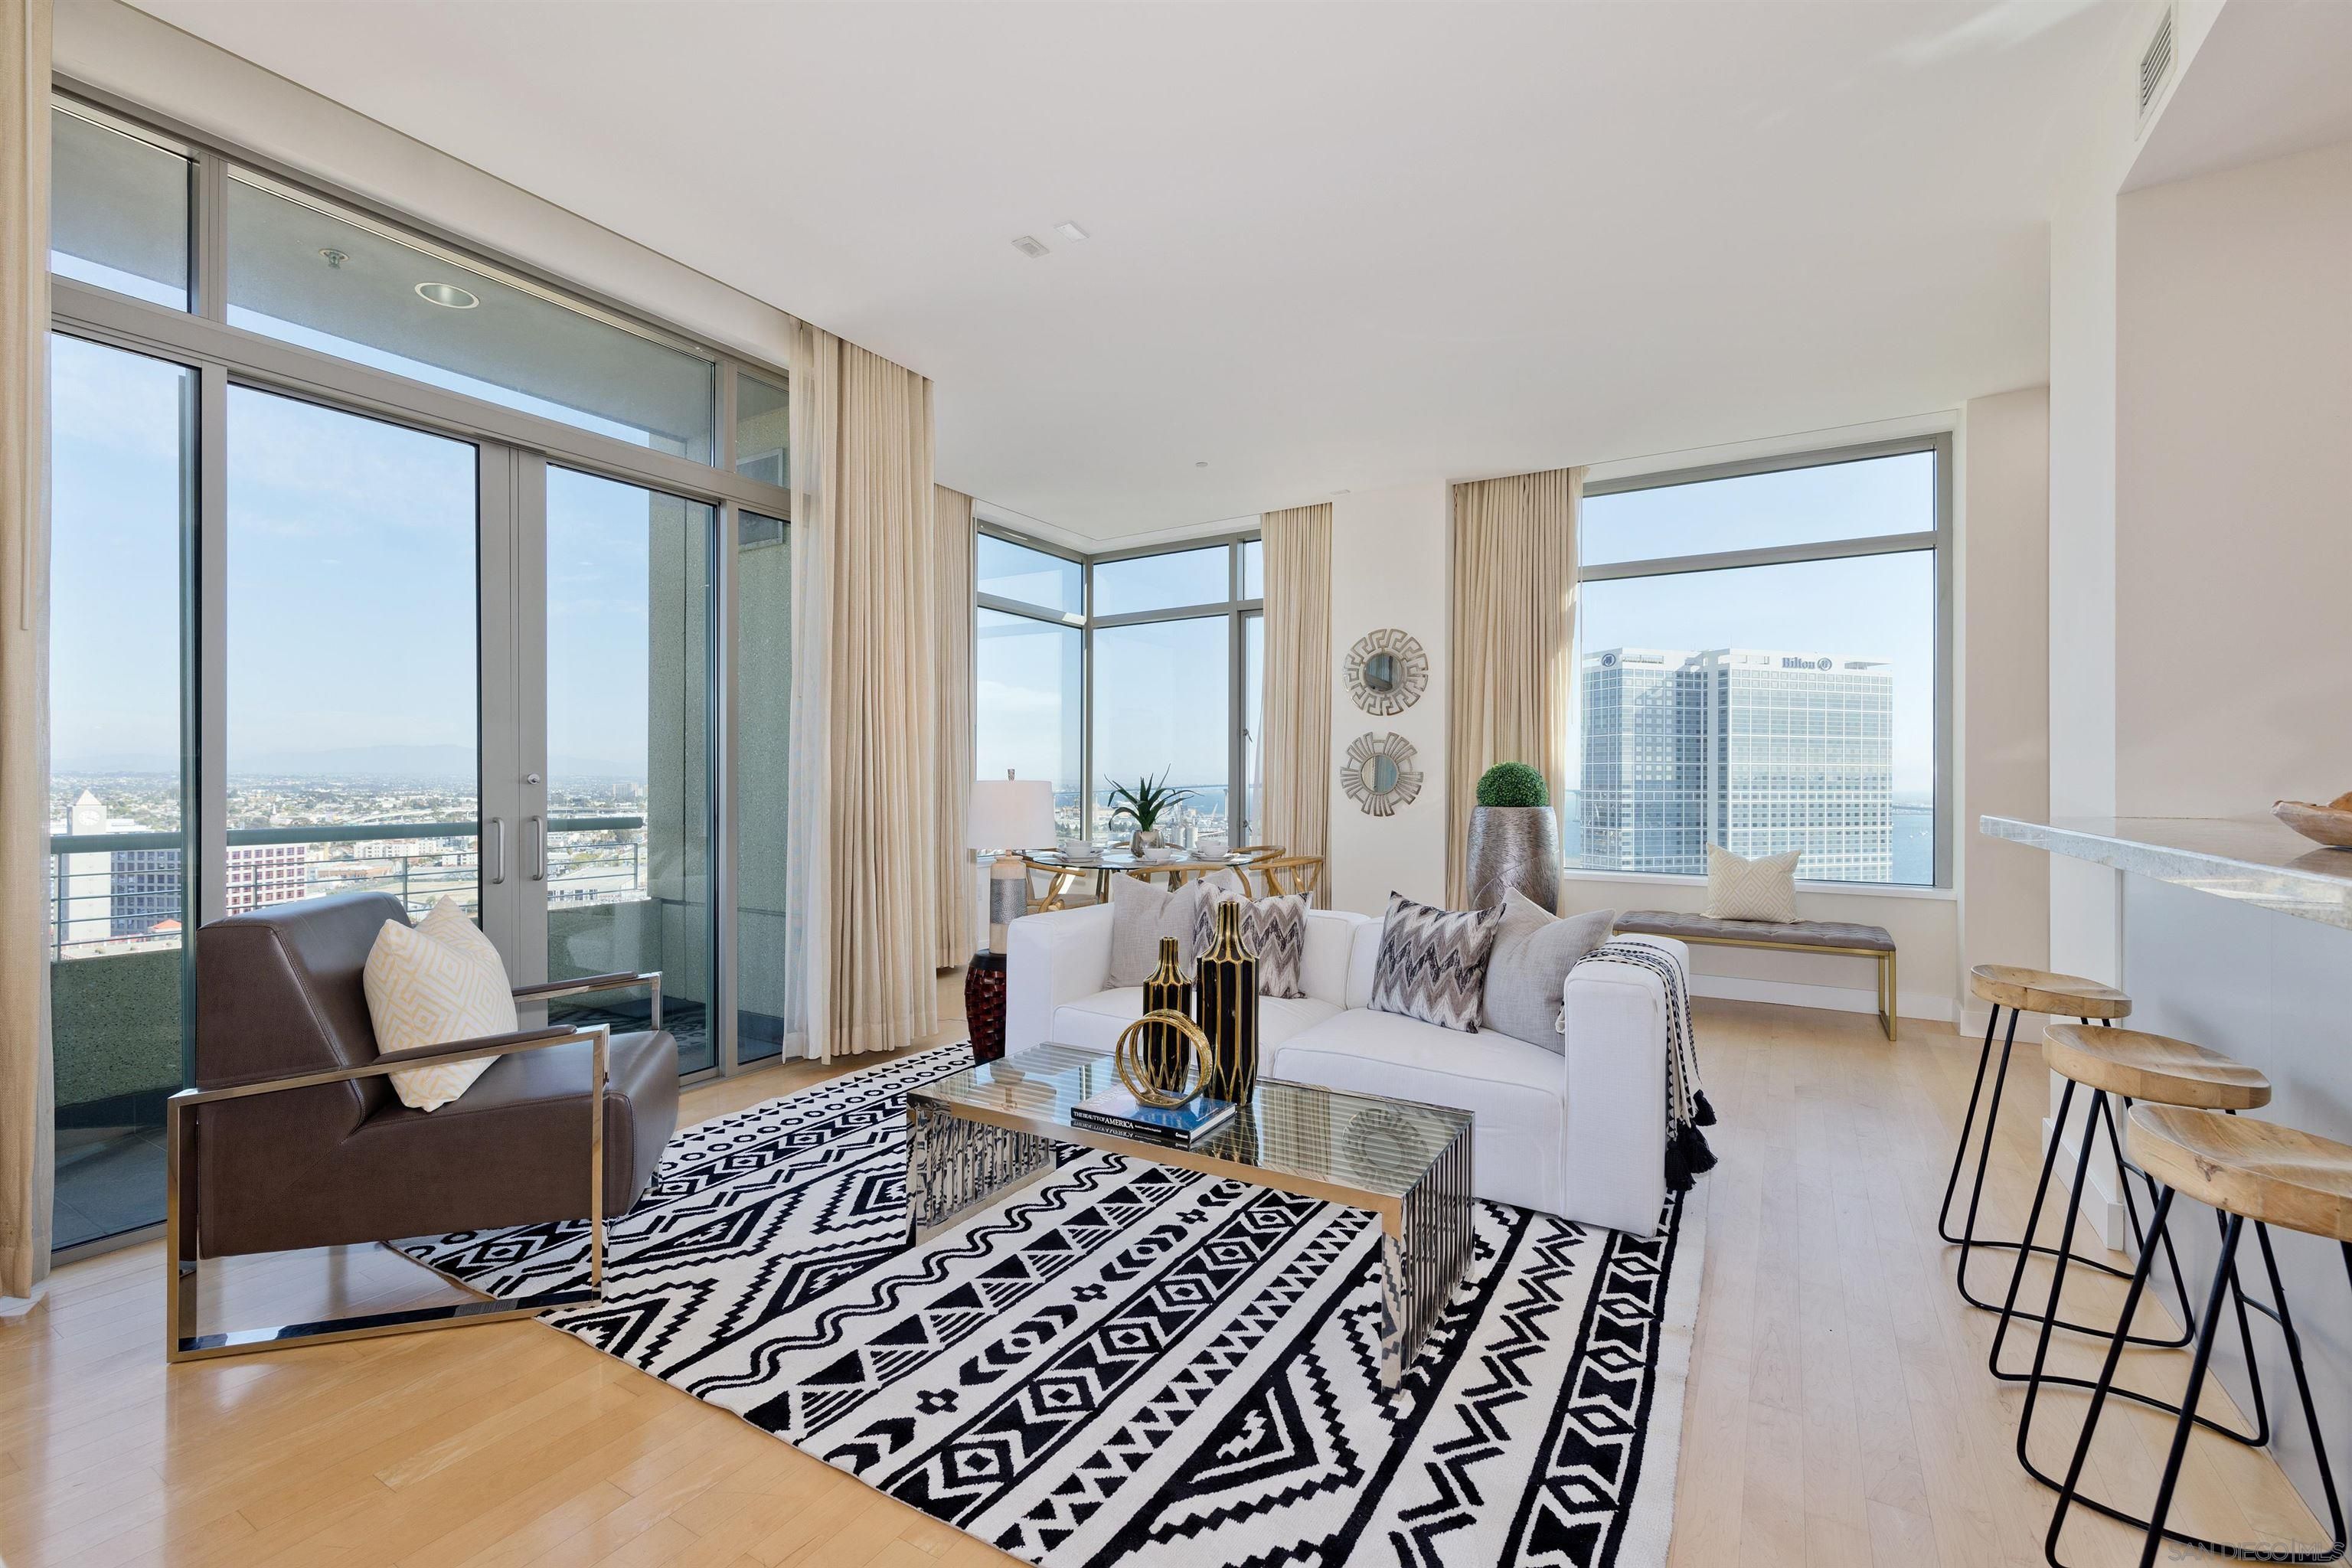 Main Photo: DOWNTOWN Condo for sale : 3 bedrooms : 165 6th Ave #2302 in San Diego